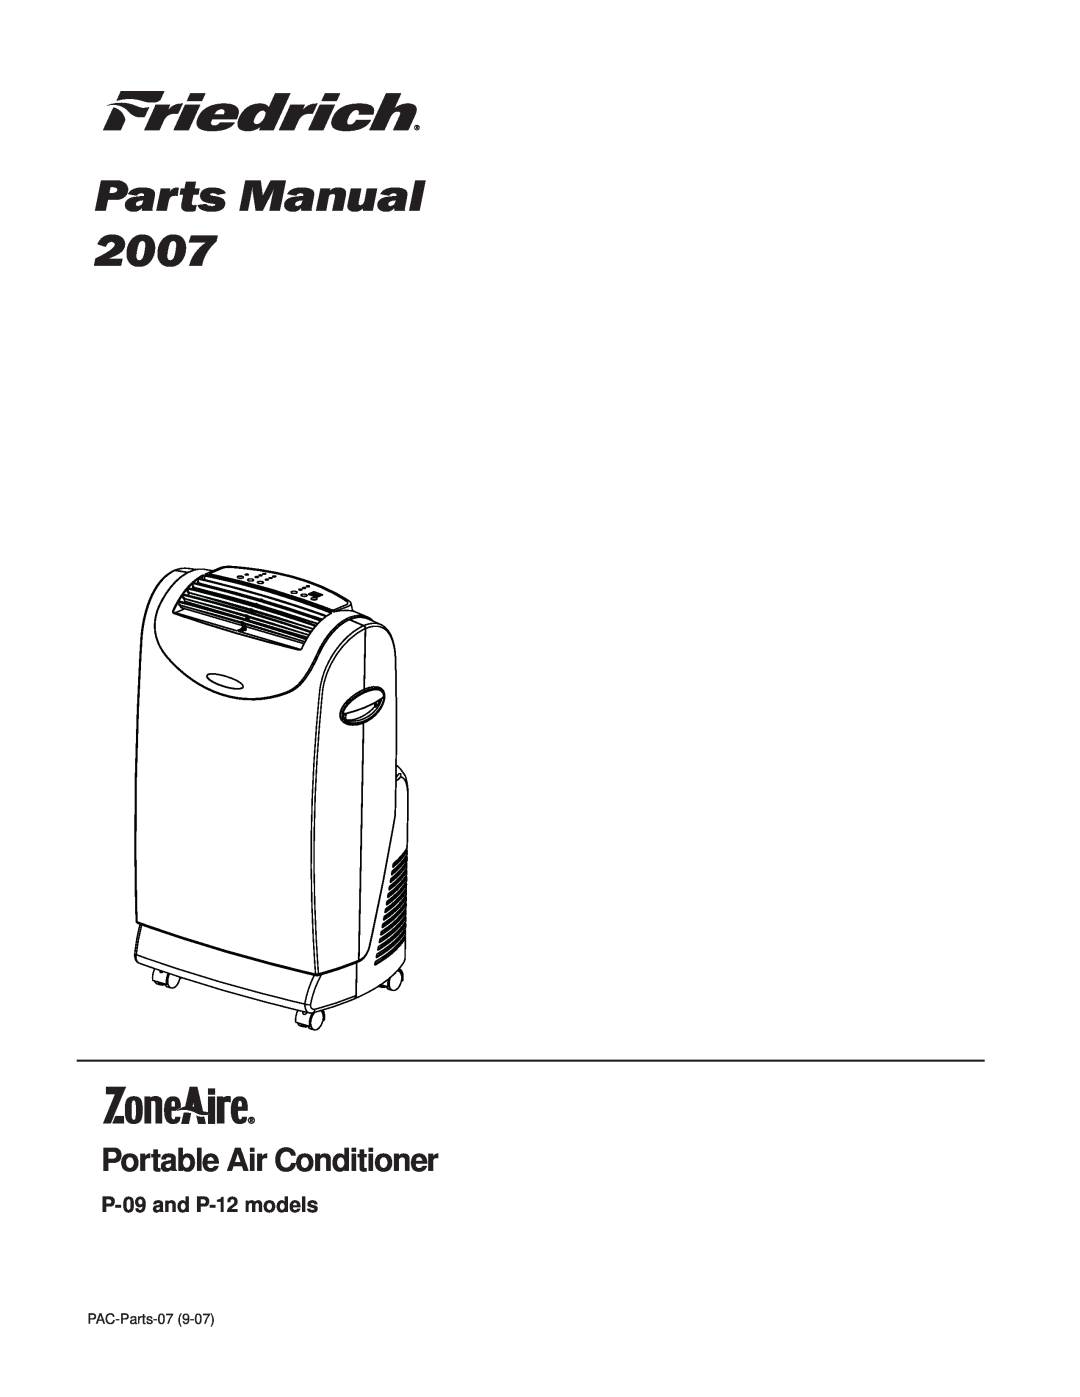 Friedrich operation manual Portable Air Conditioner, Model P-12 